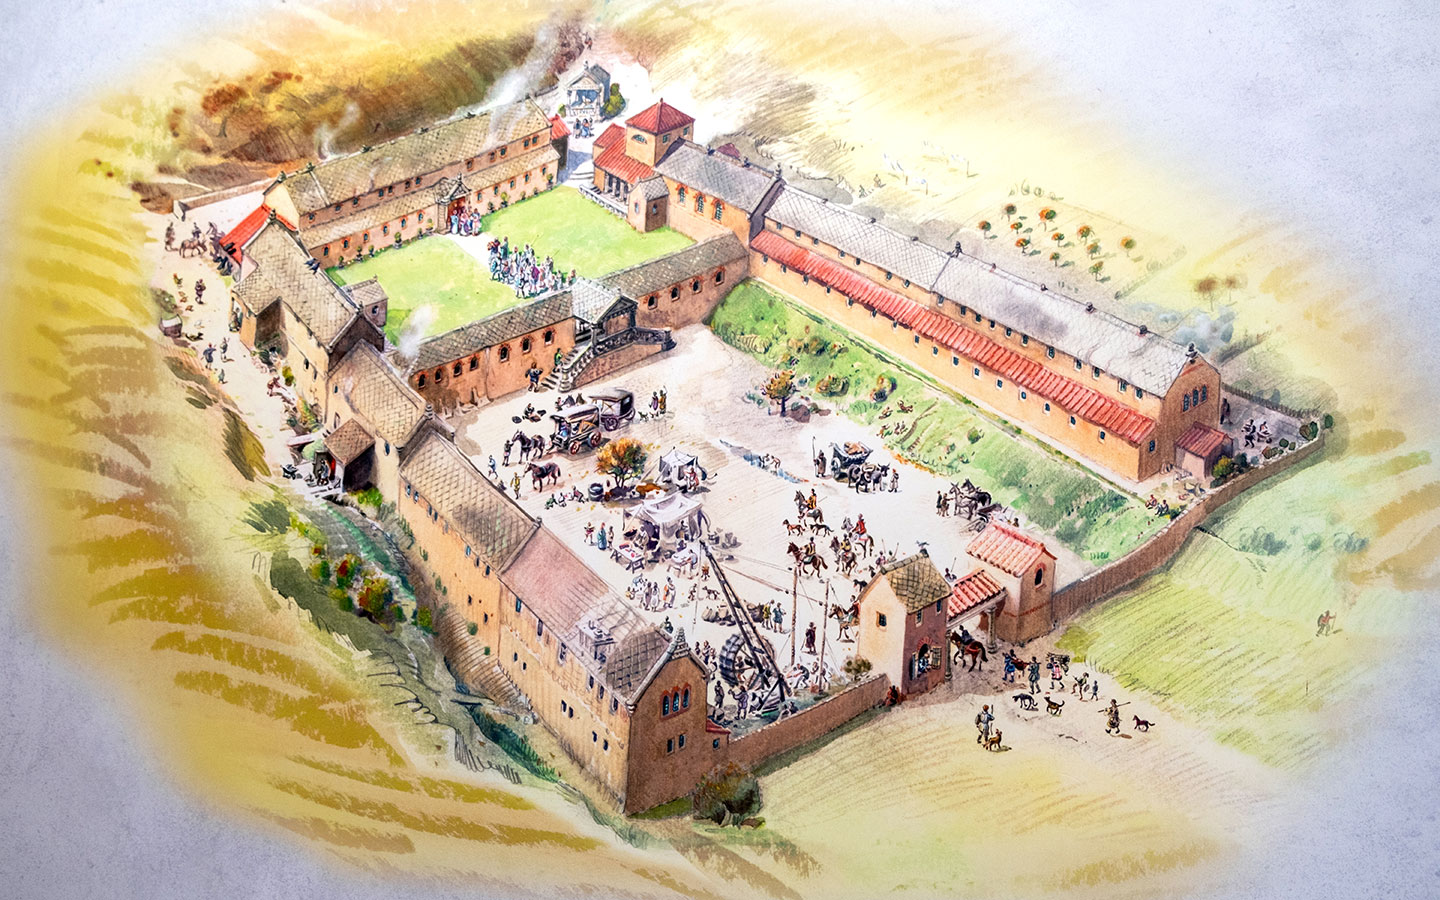 An artist's impression of Chedworth Roman Villa in its heyday